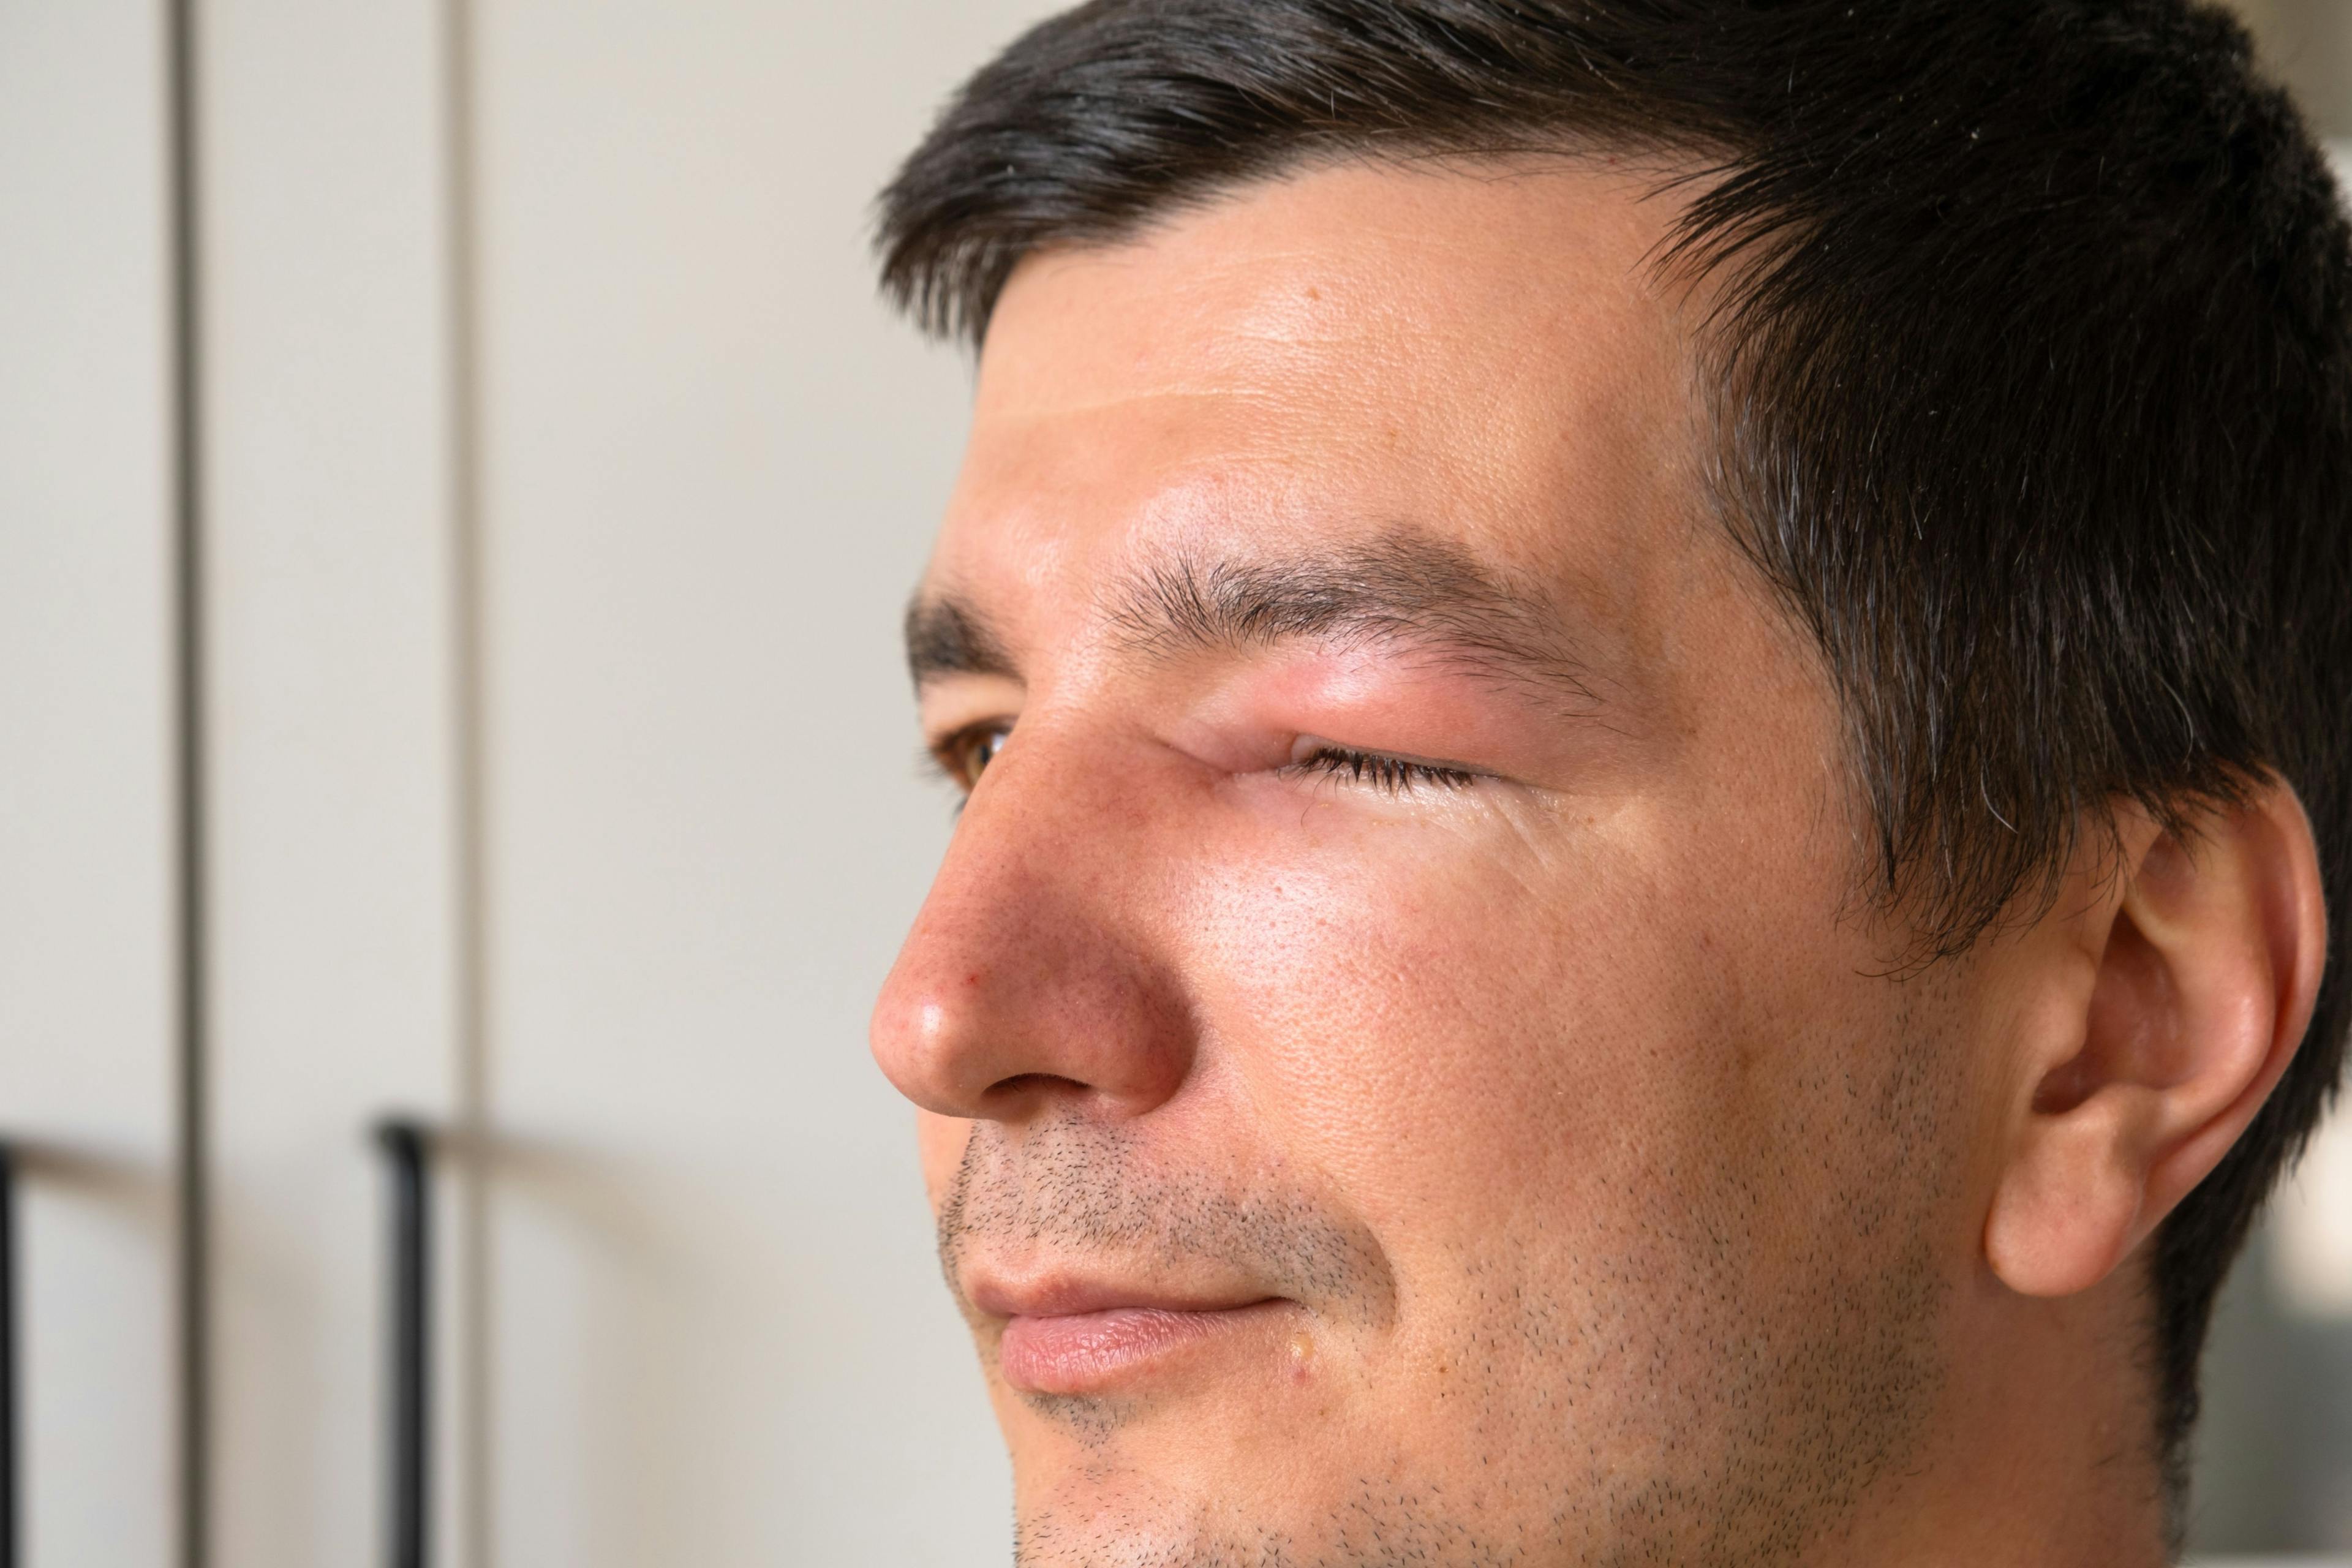 Man experiencing swelling in face